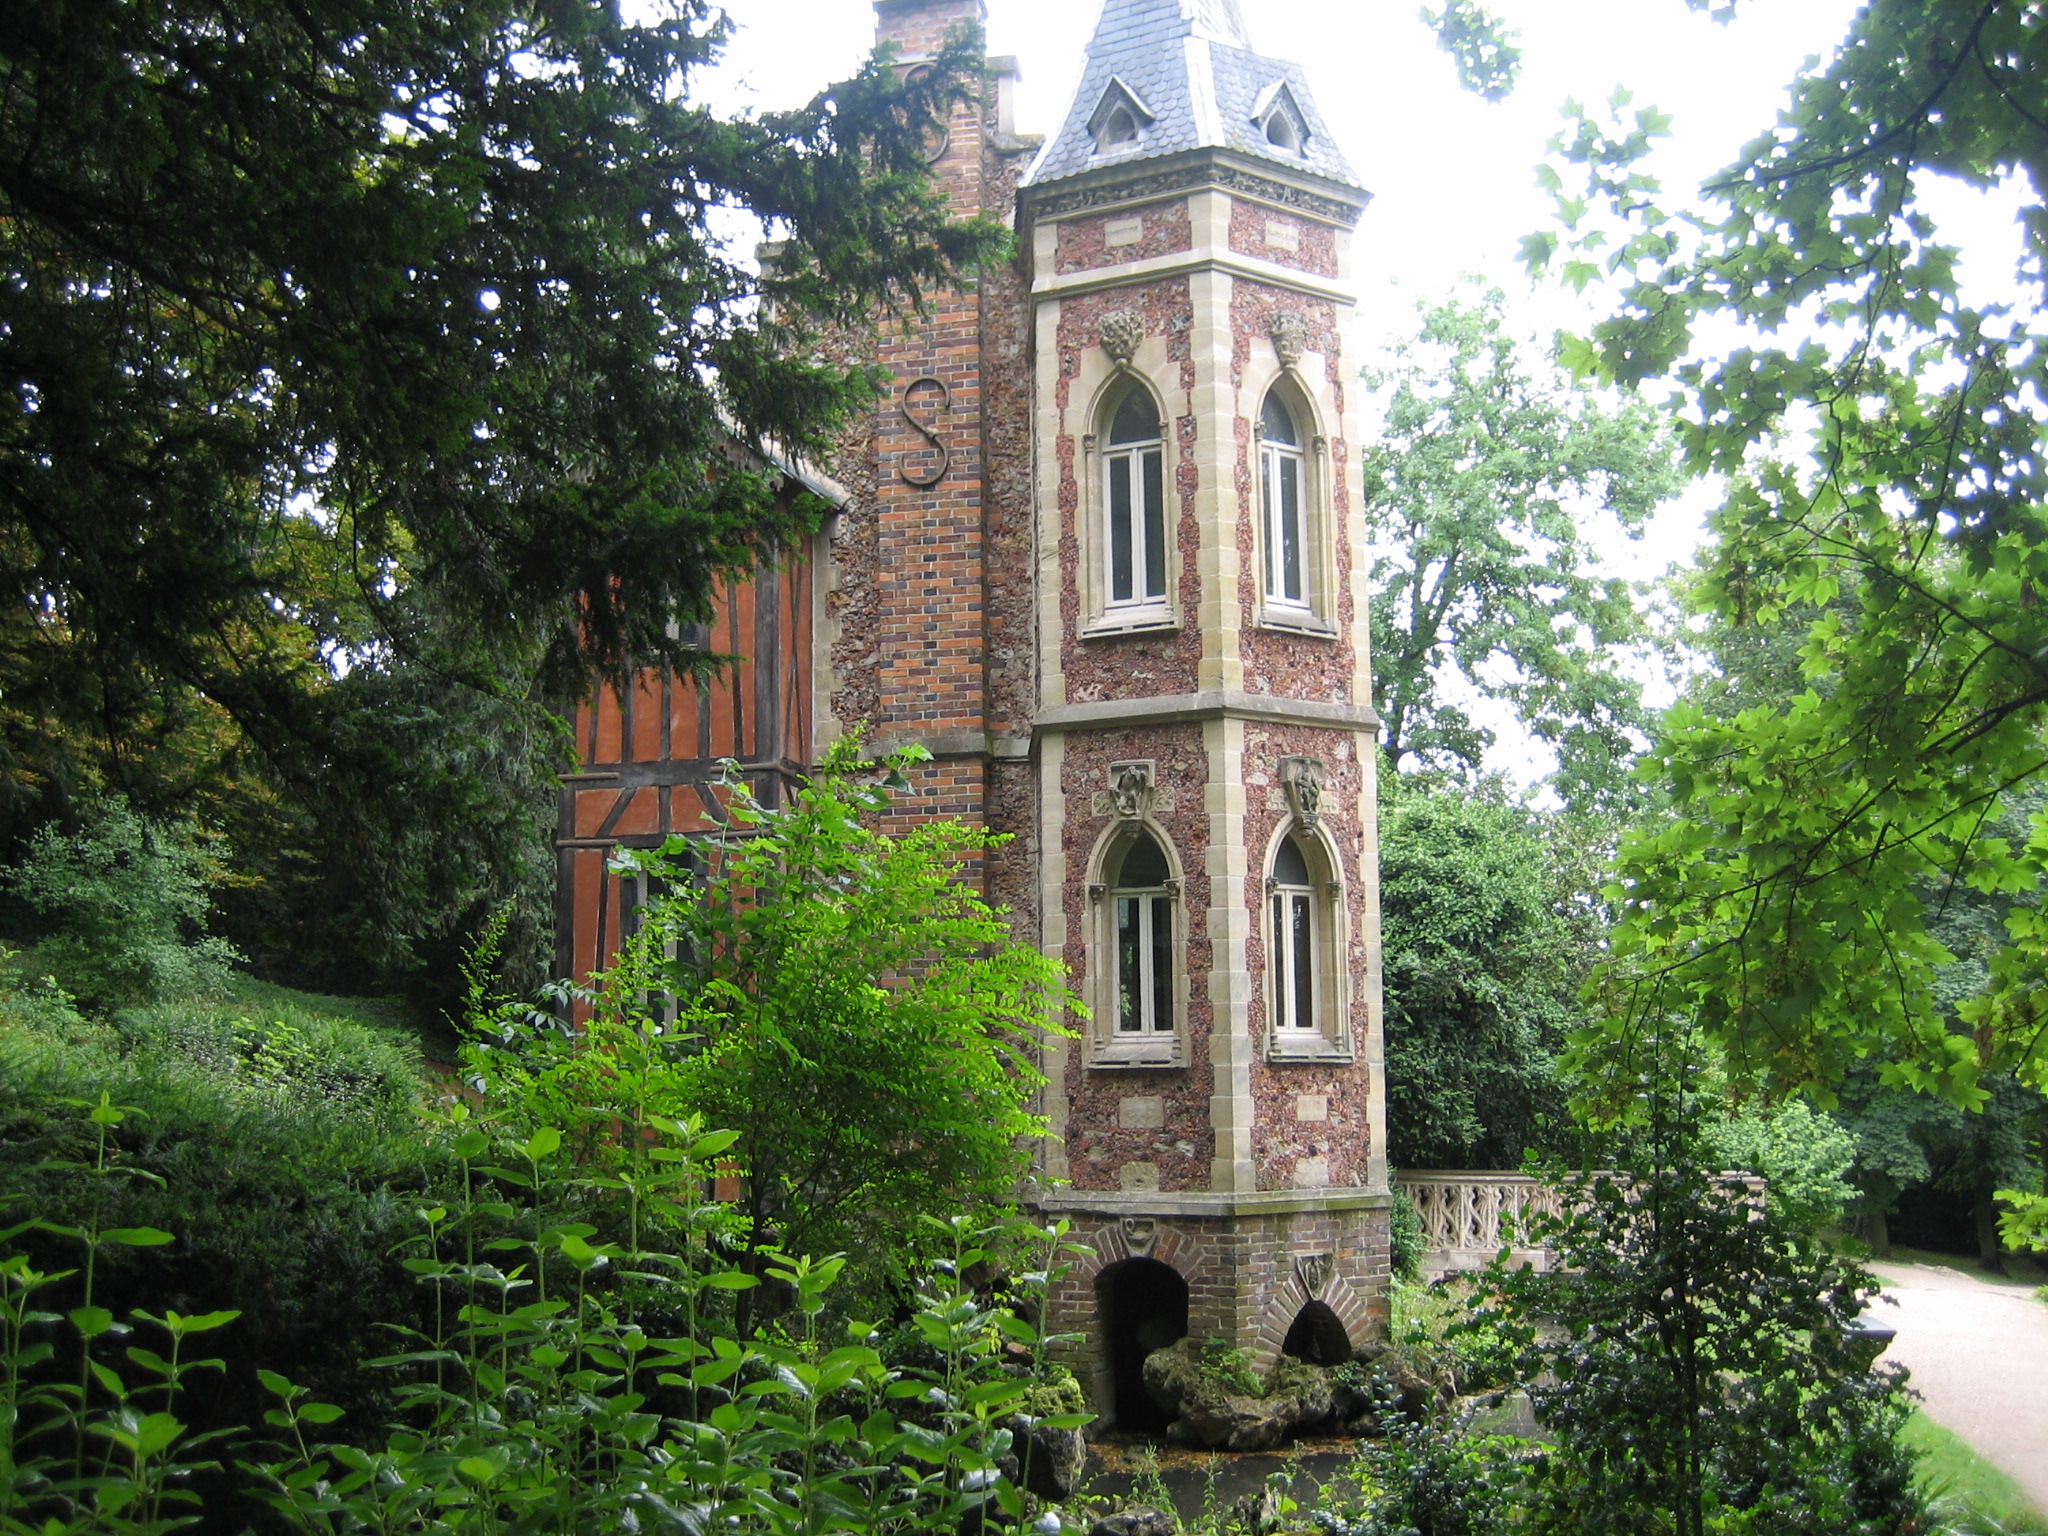 a tall brick clock tower sitting next to green trees